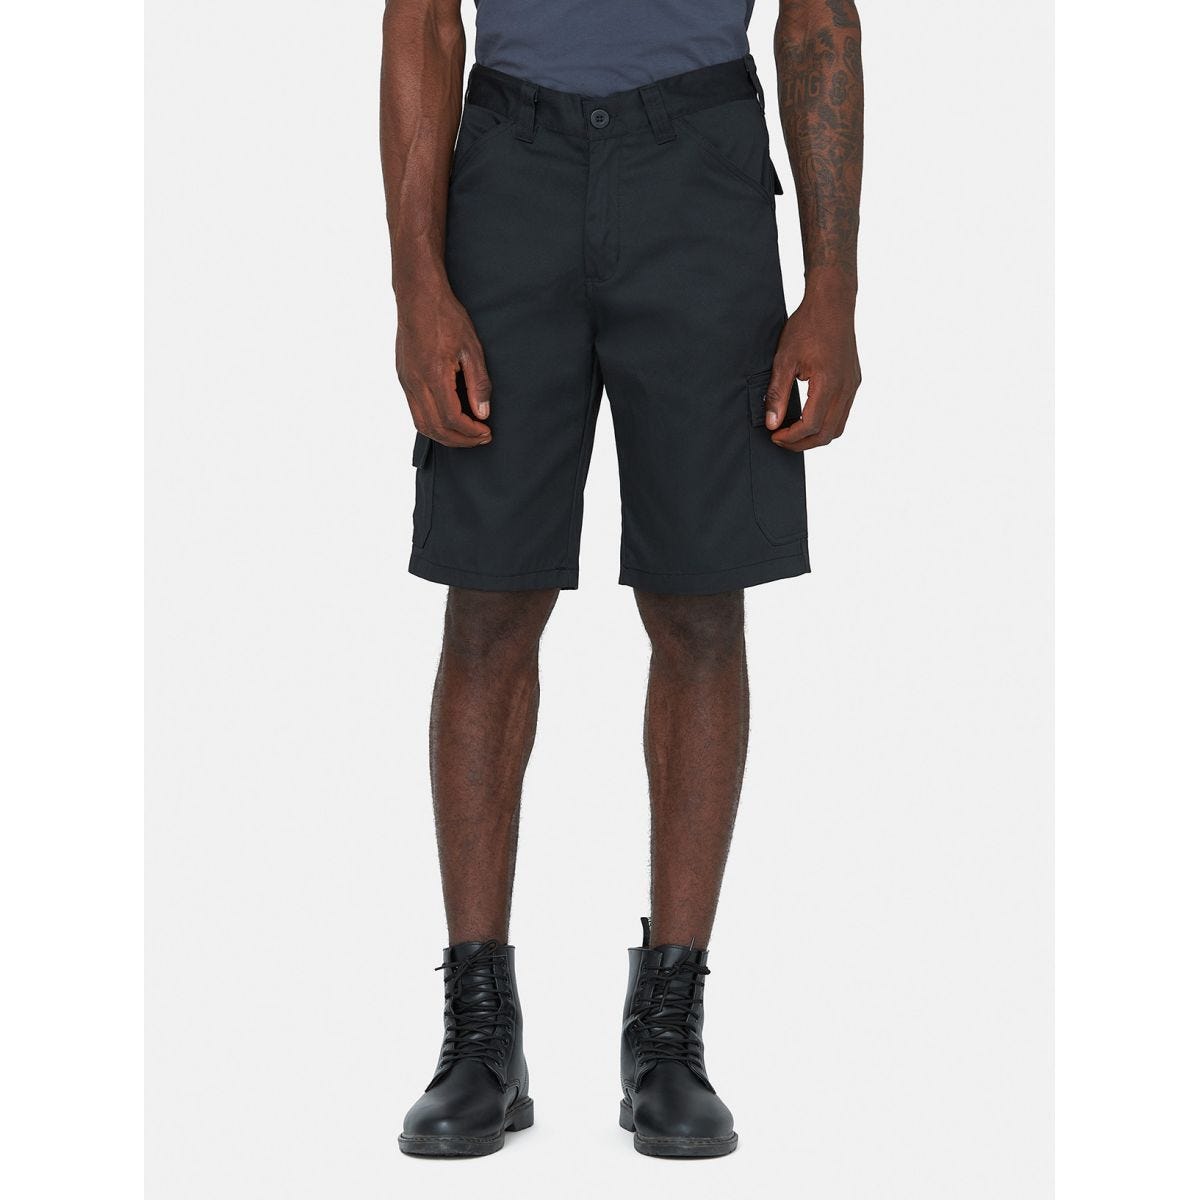 Short Everyday Noir - Dickies - Taille 50 0